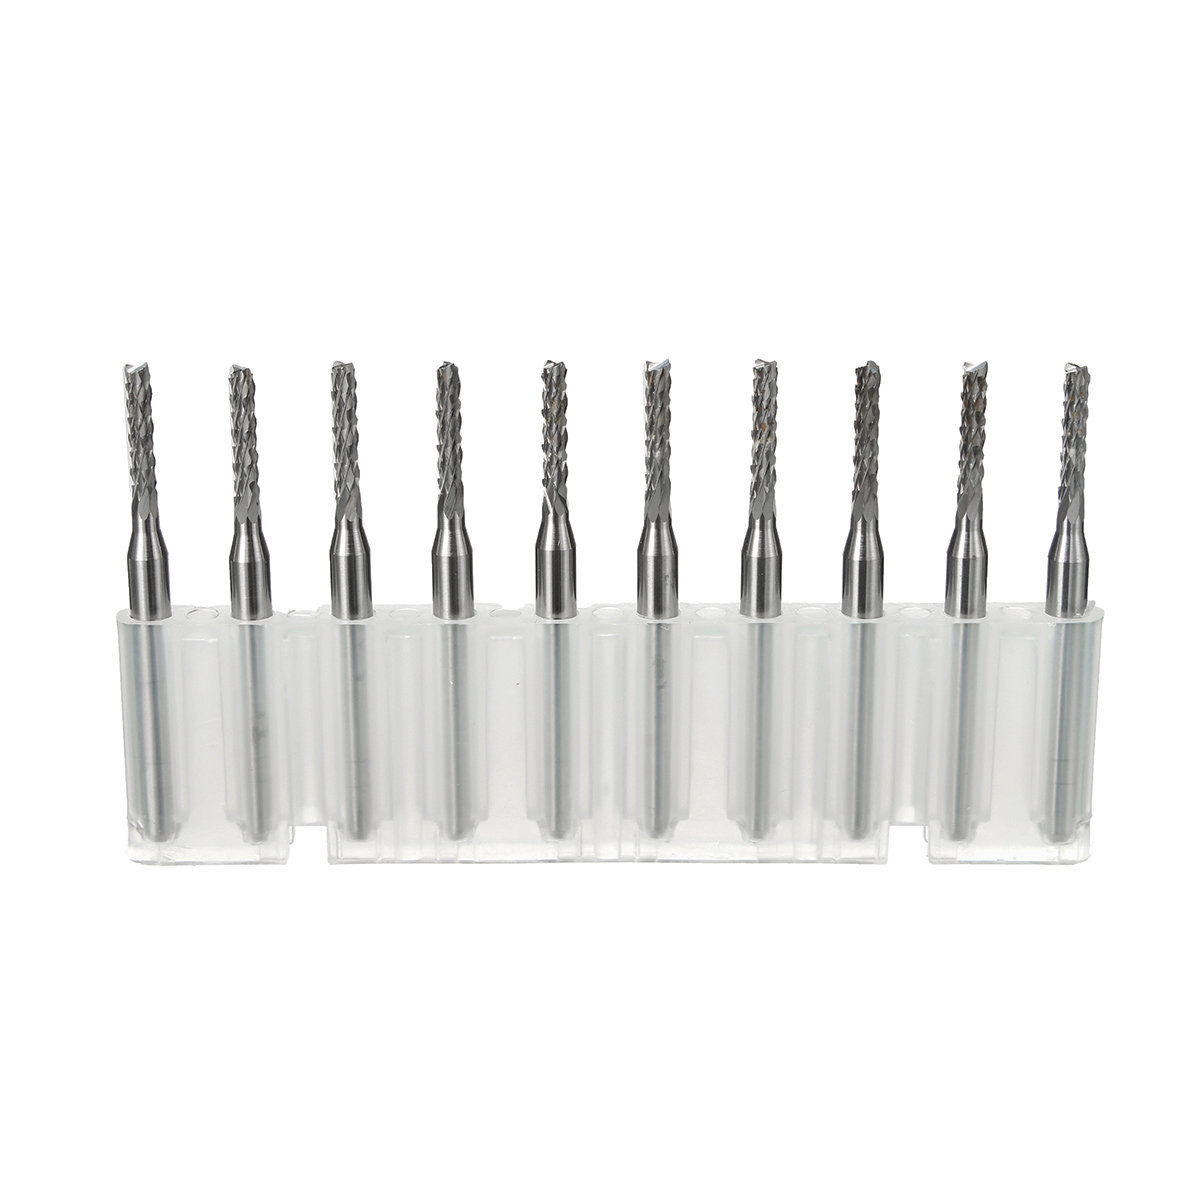 Drillpro 3.175mm Shank 2mm Carbide Engraving Bits For CNC/PCB Machinery Rotary End Mill Burr